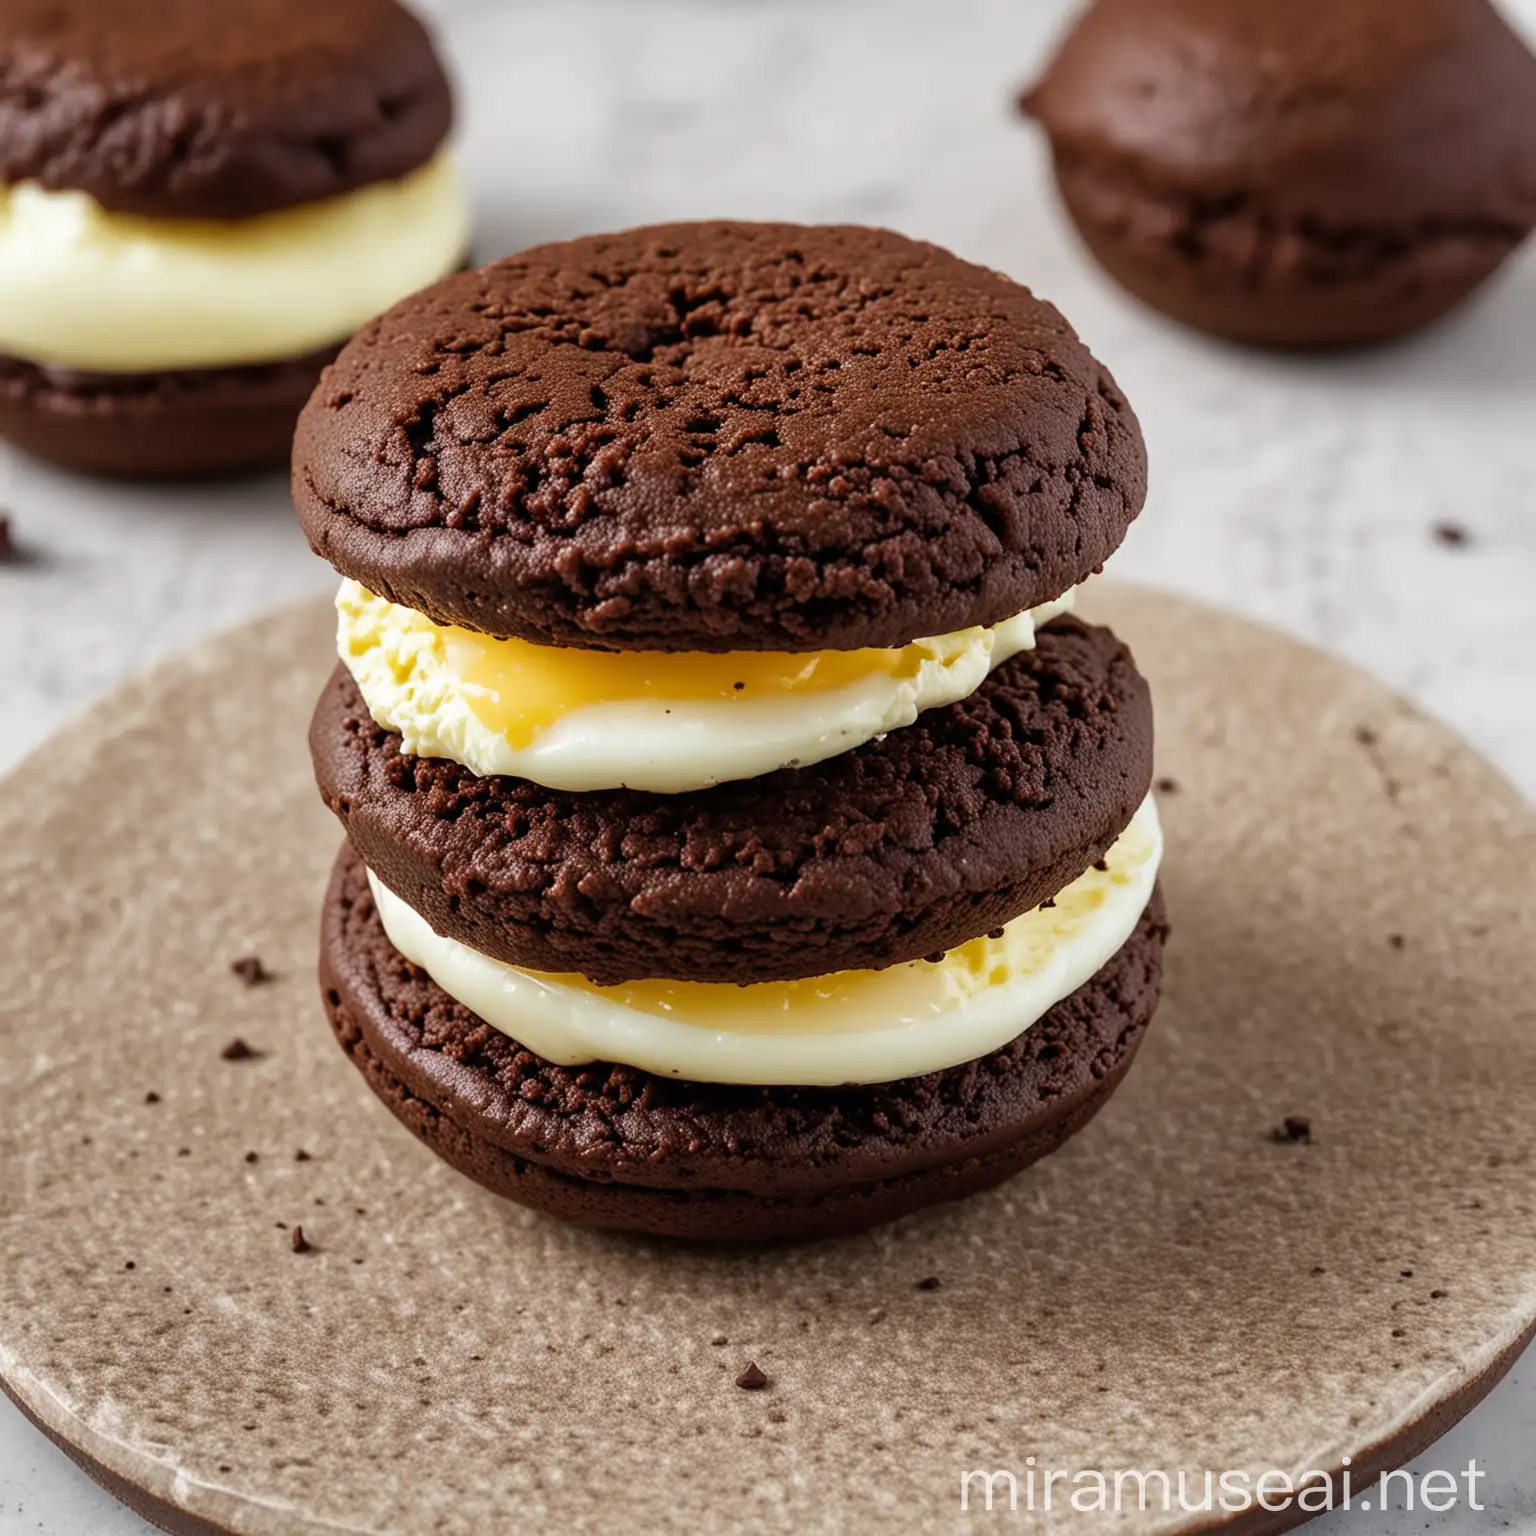 A sandwich of two eggs between a chocolate whoopee pie